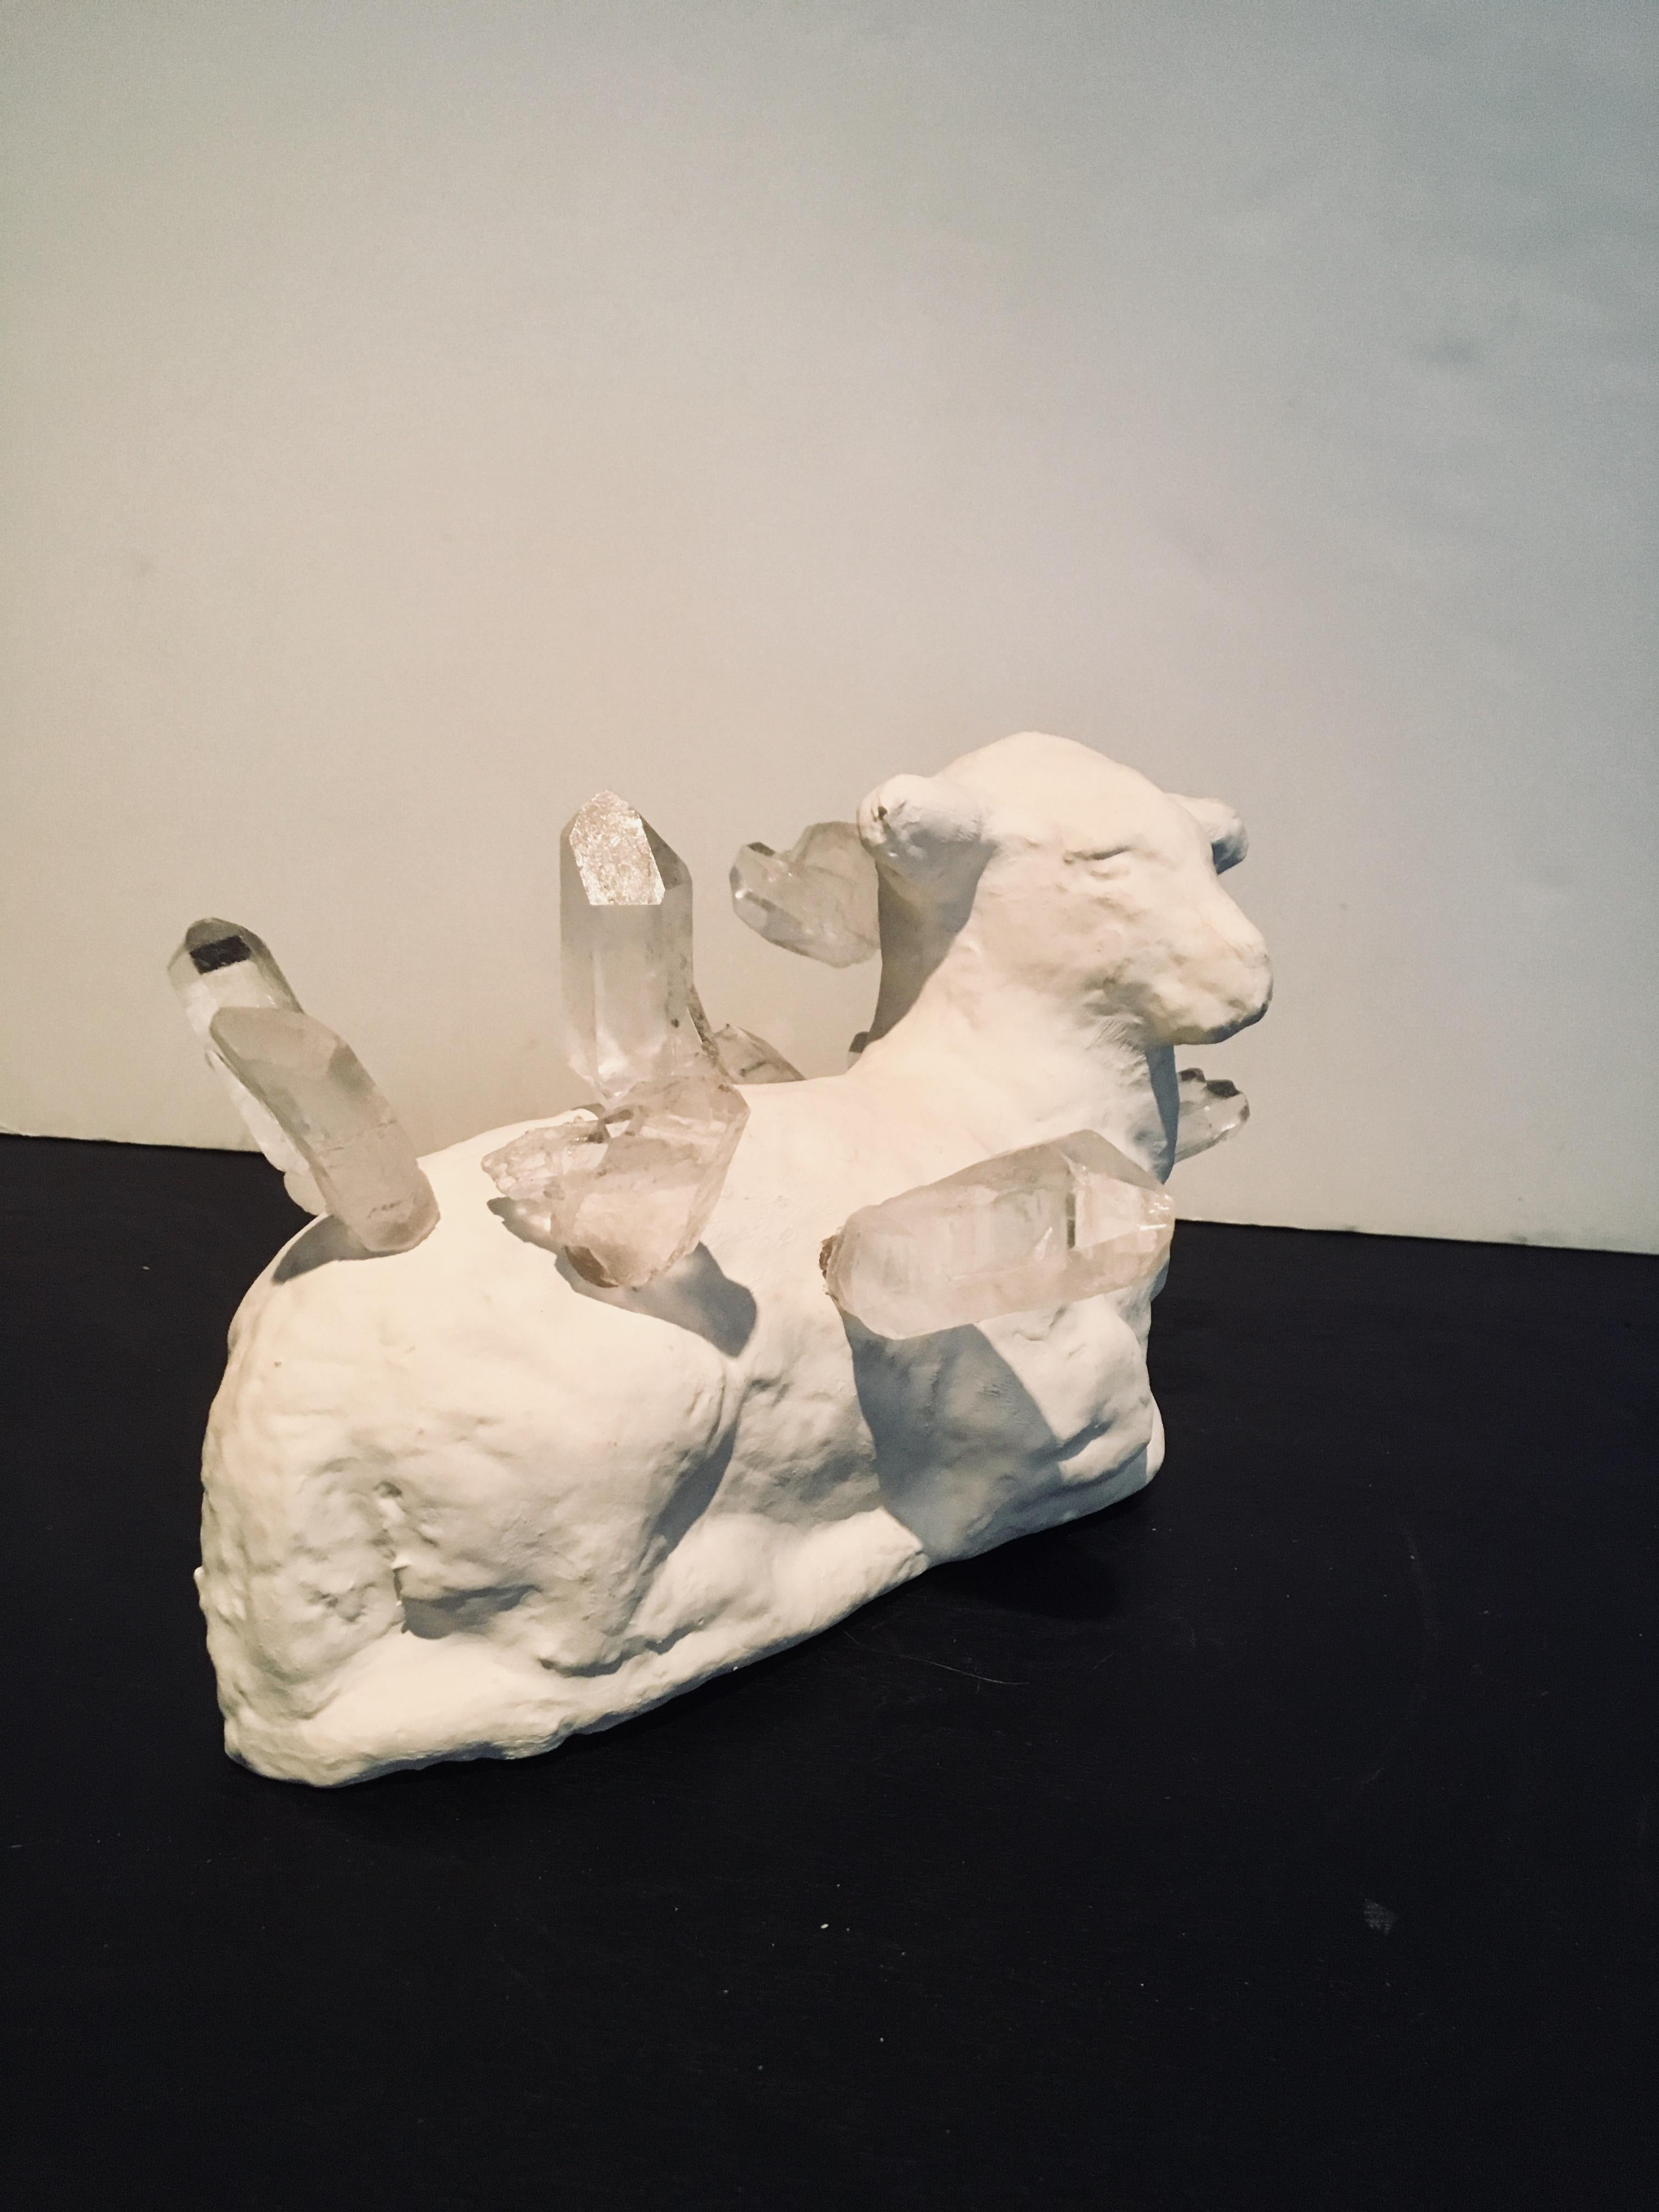 The artistic collaboration of Kelly Bugden + Van Wifvat has produced a thought-provoking body of sculptures, paintings, and constructions. Nature, childhood memories, and everyday archetypes take shape in unexpected combinations of materials. The